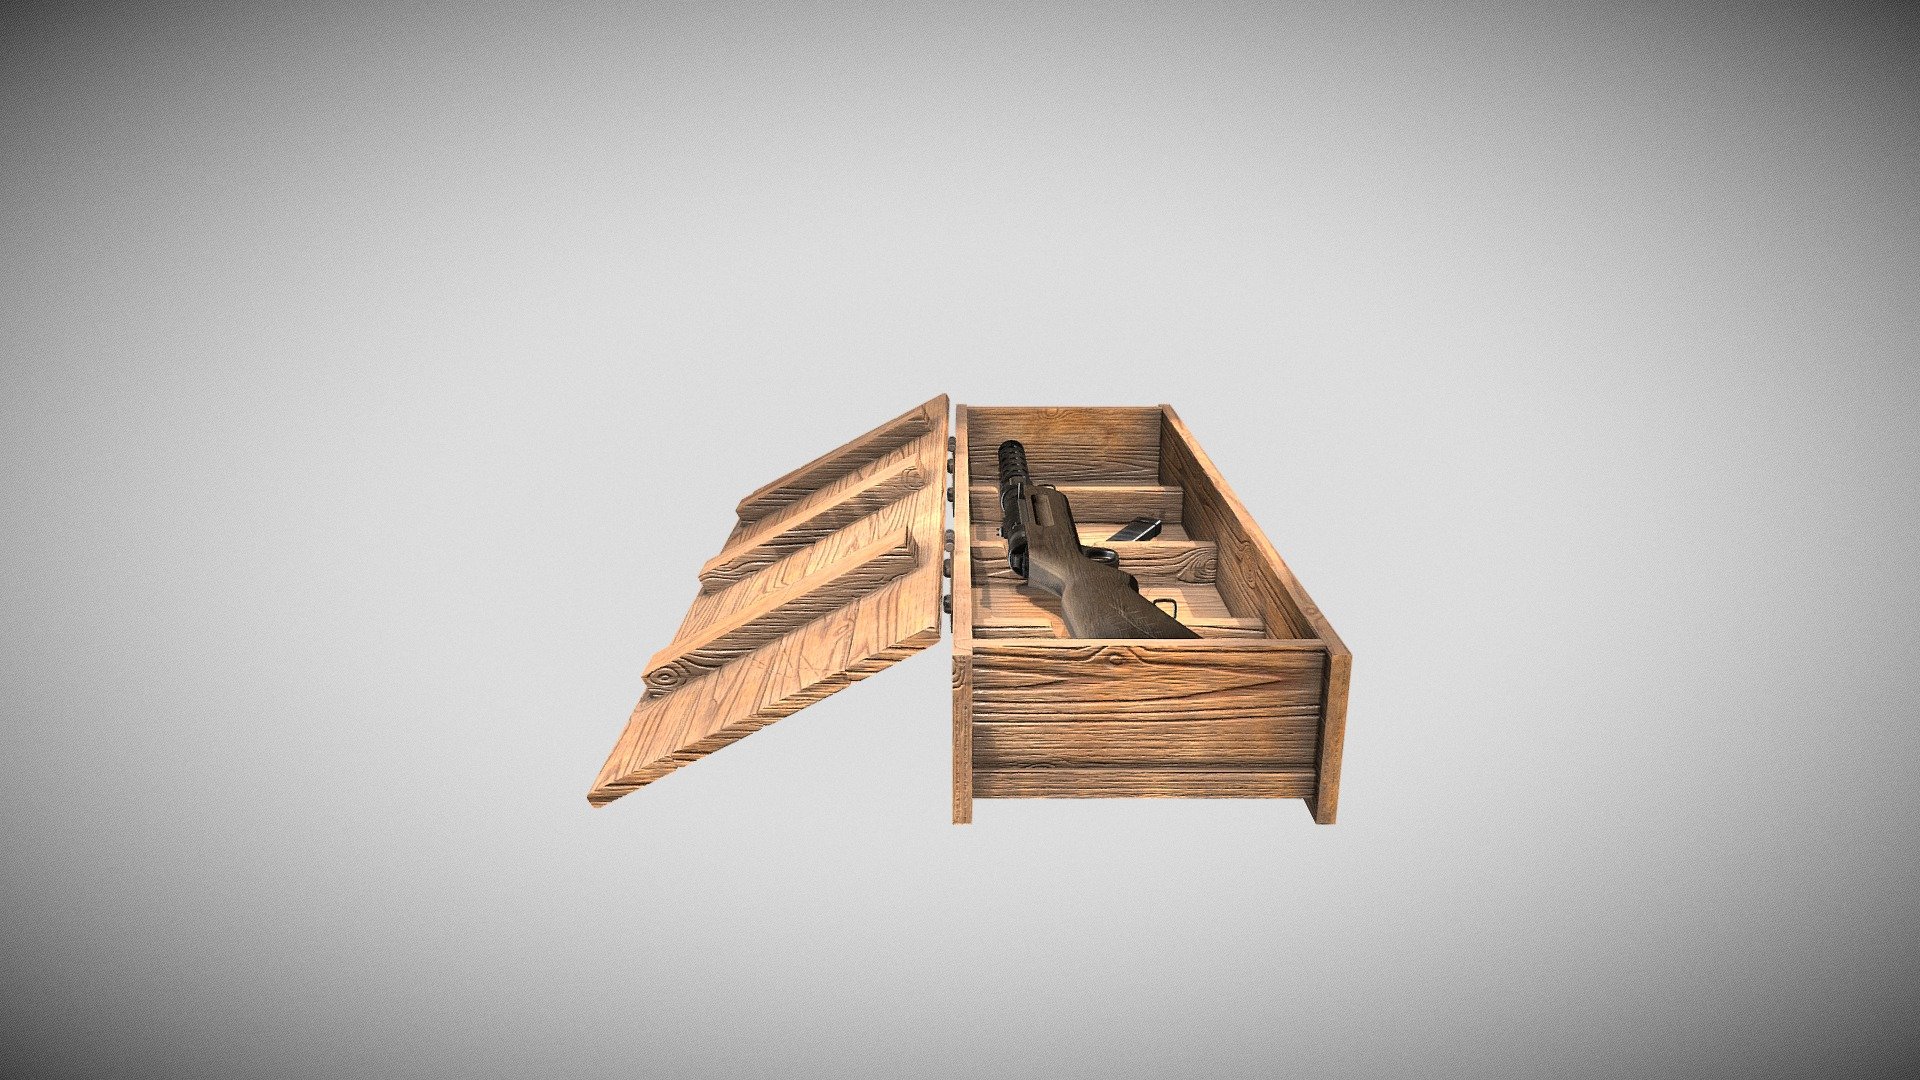 mp18 crate prop for an unreal game